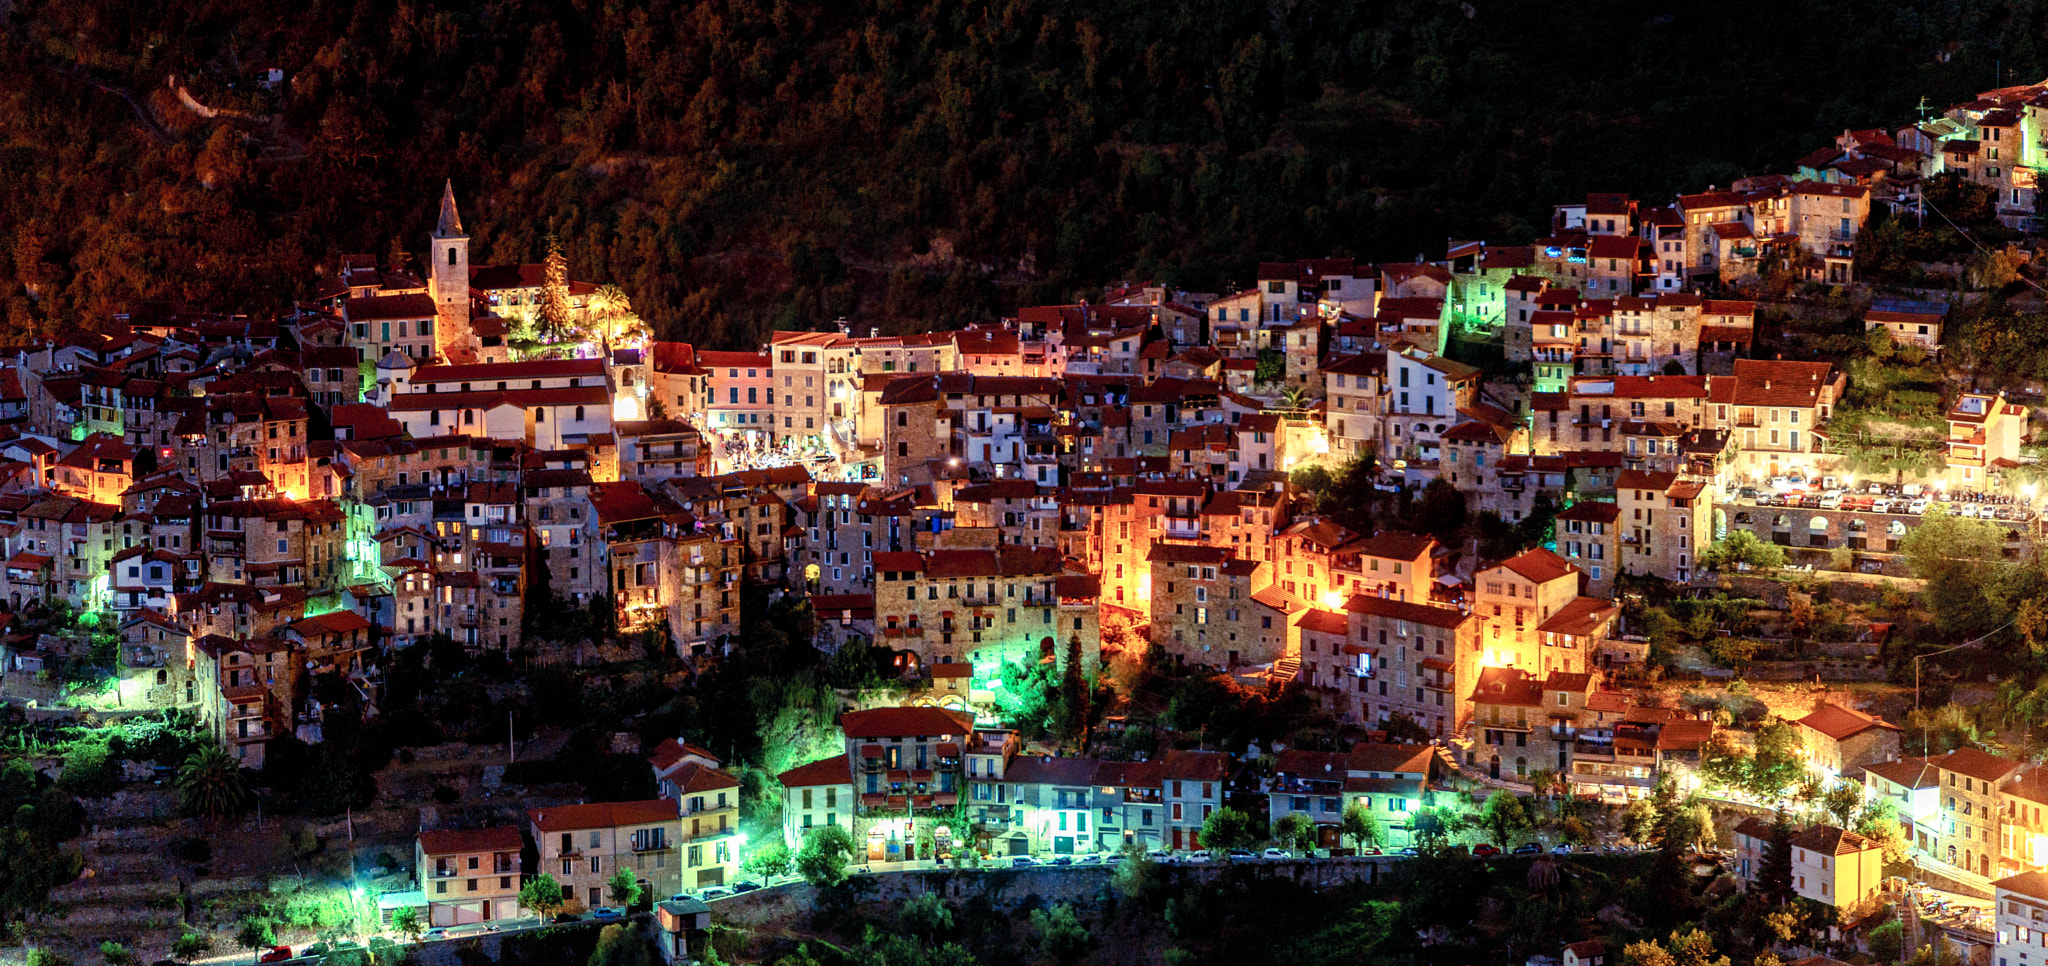 Sony a7 II + Tamron SP 70-200mm F2.8 Di VC USD sample photo. Apricale at night photography